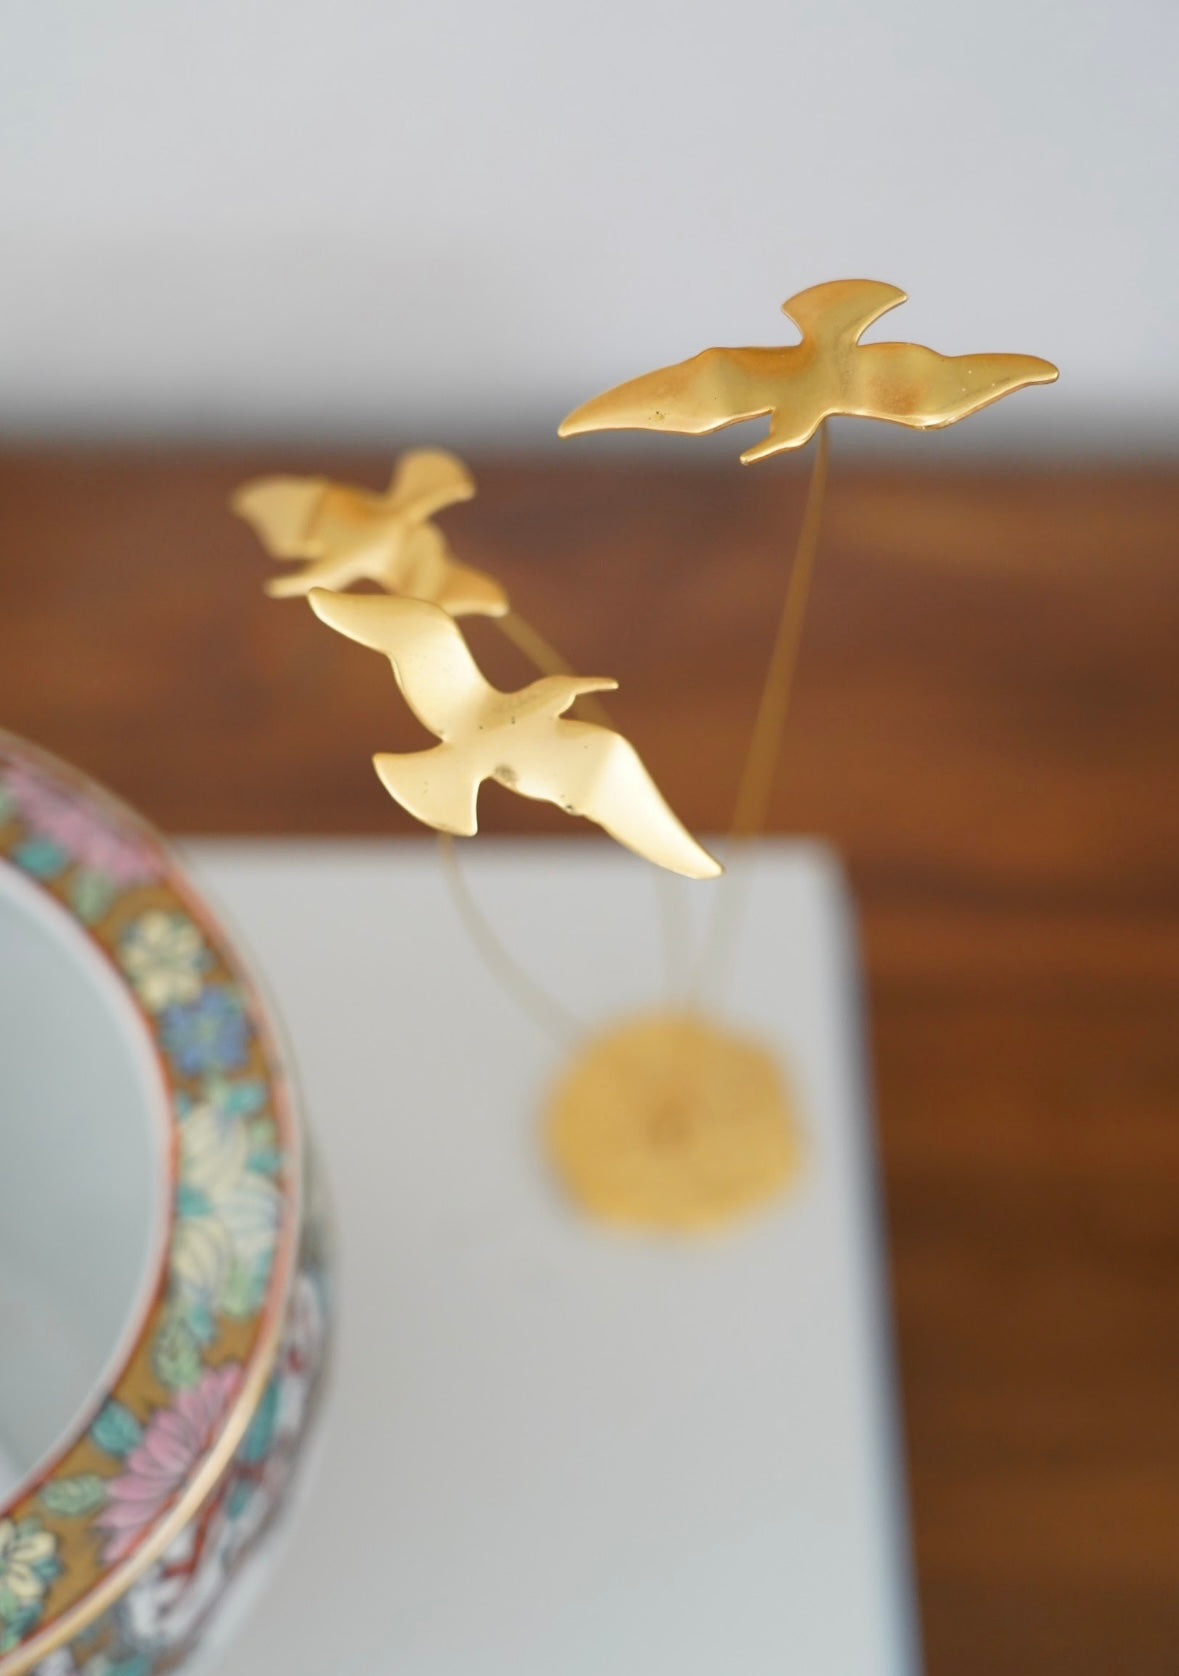 GOLD PLATED SEAGULL SCULPTURE